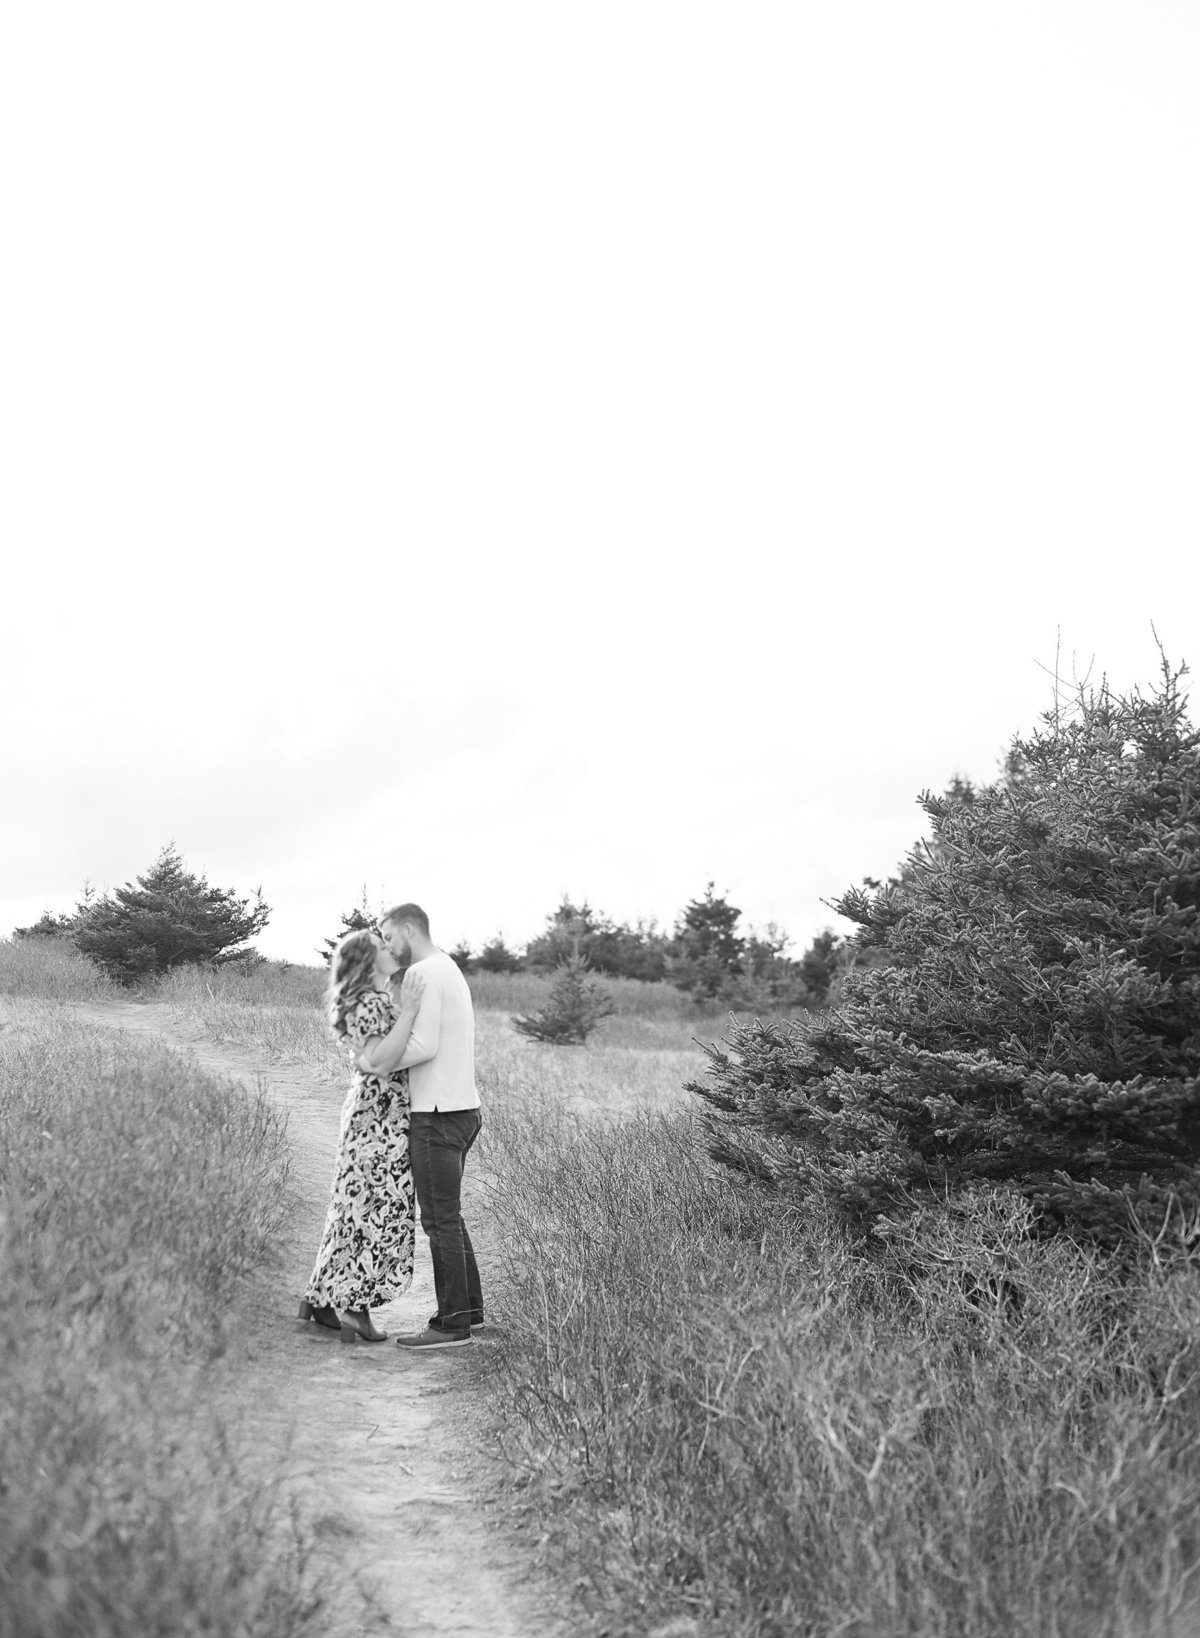 Jacqueline Anne Photography - Akayla and Andrew - Lawrencetown Beach-59